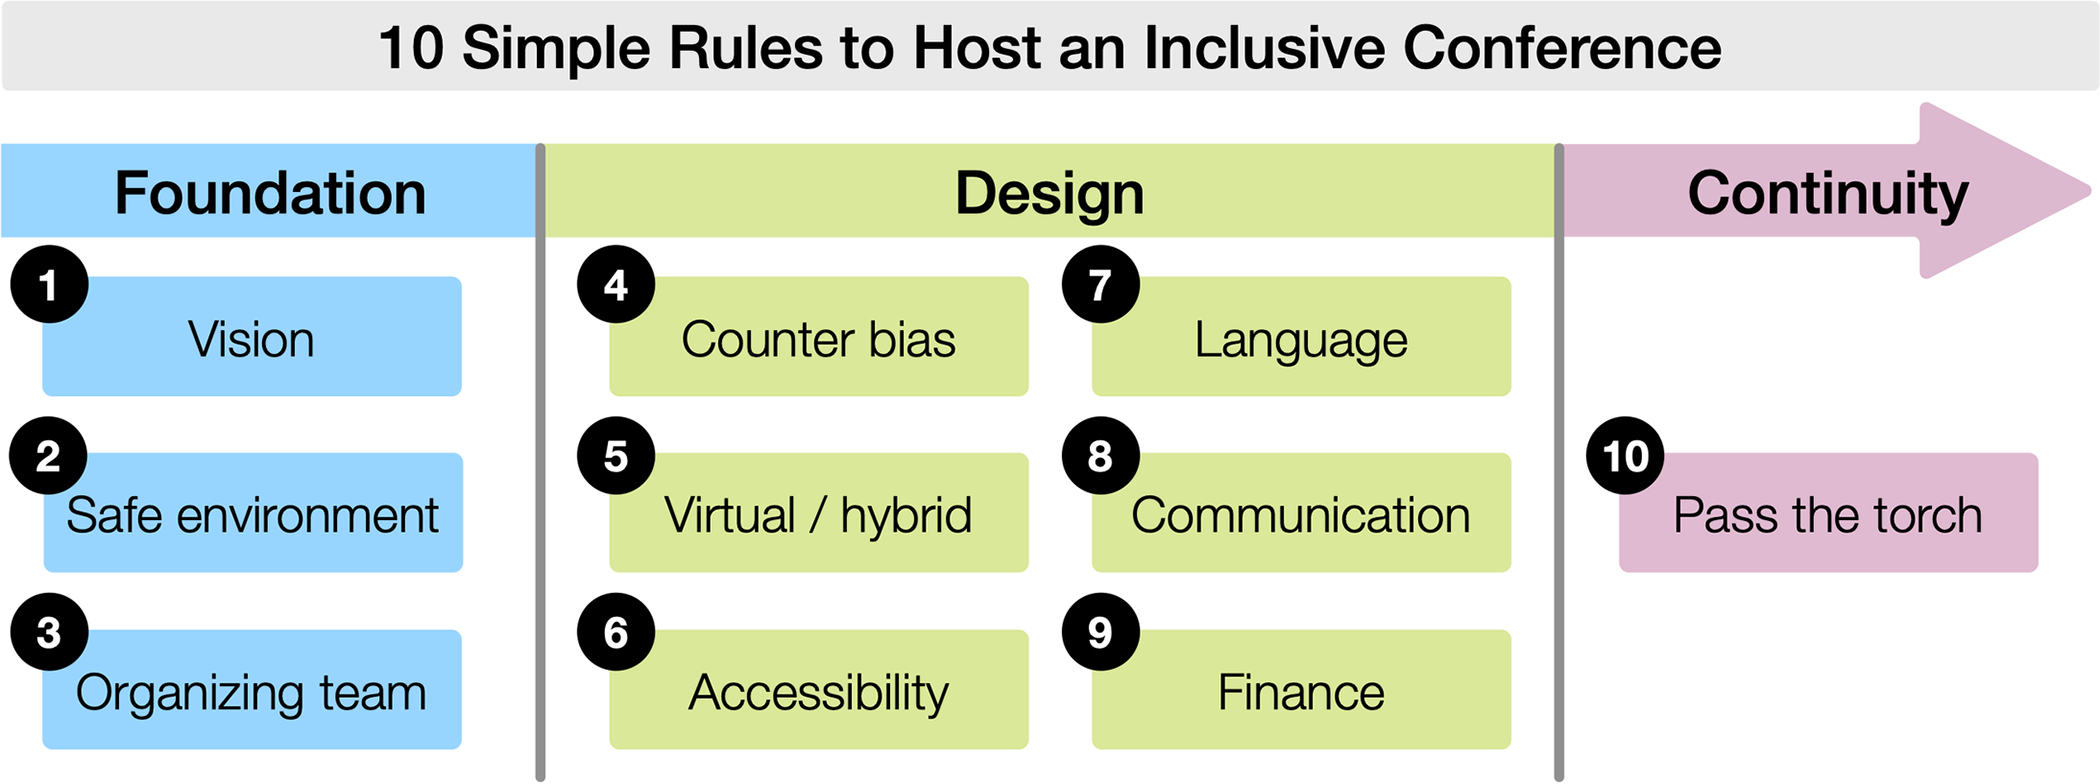 Foundational: 1) Vision, 2) safe environment, and 3) organizing team. Design: 4) Counter bias, 5) virtual/hybrid, 6) accessibility, 7) language, 8) communication, 9) finance. Continuity: 10) pass the torch